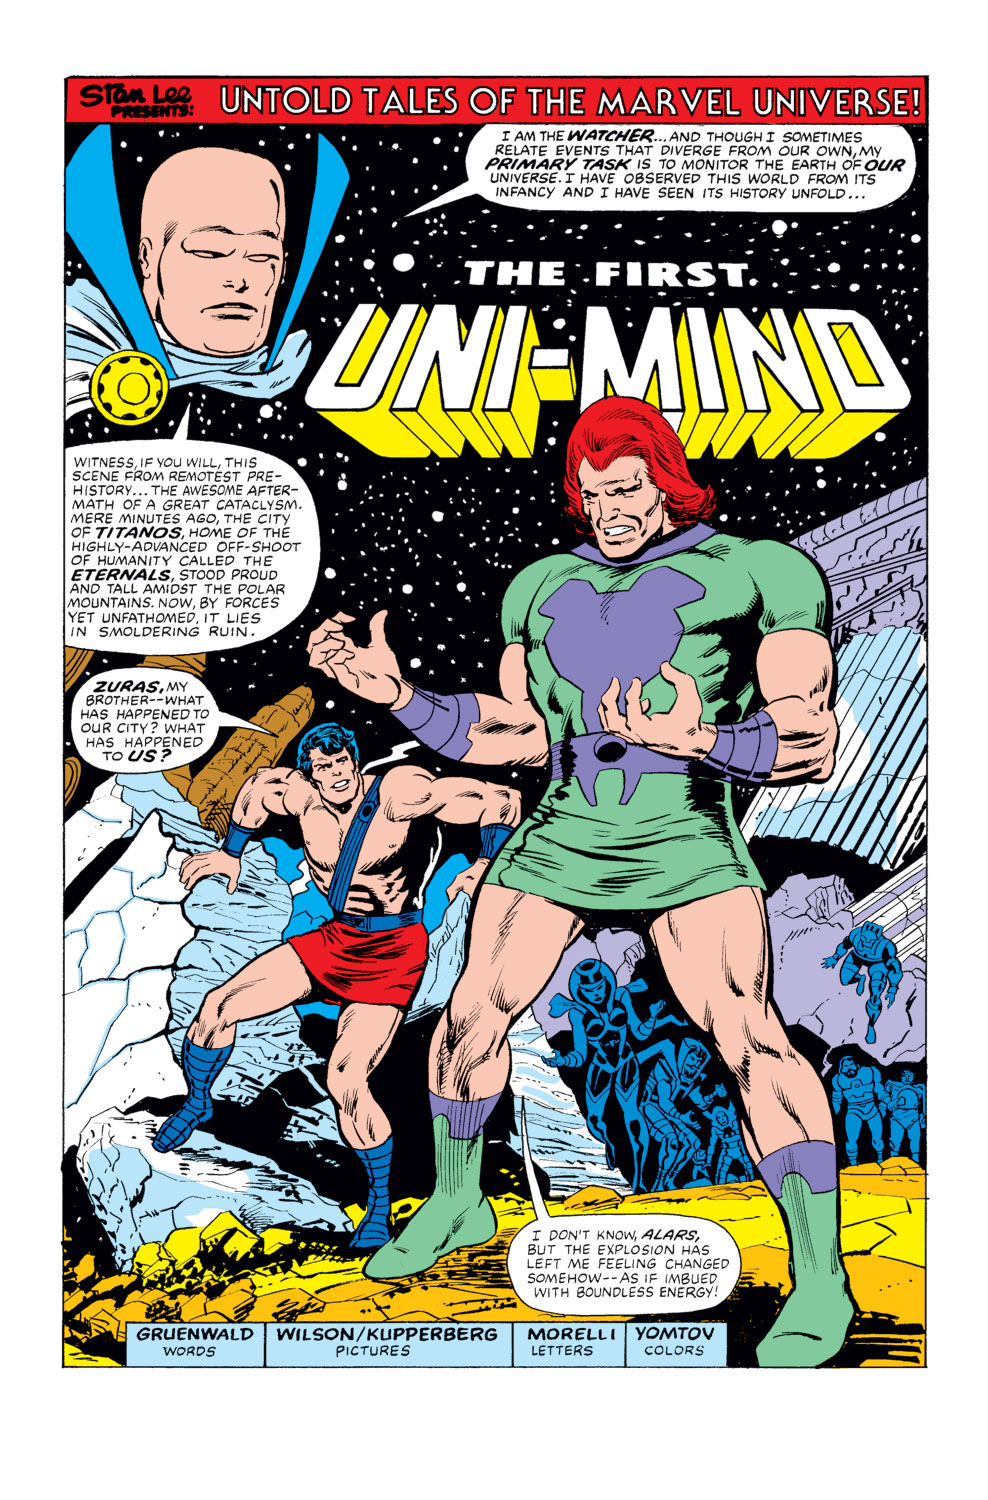 What If? (1977) issue 25 - Thor and the Avengers battled the gods - Page 34